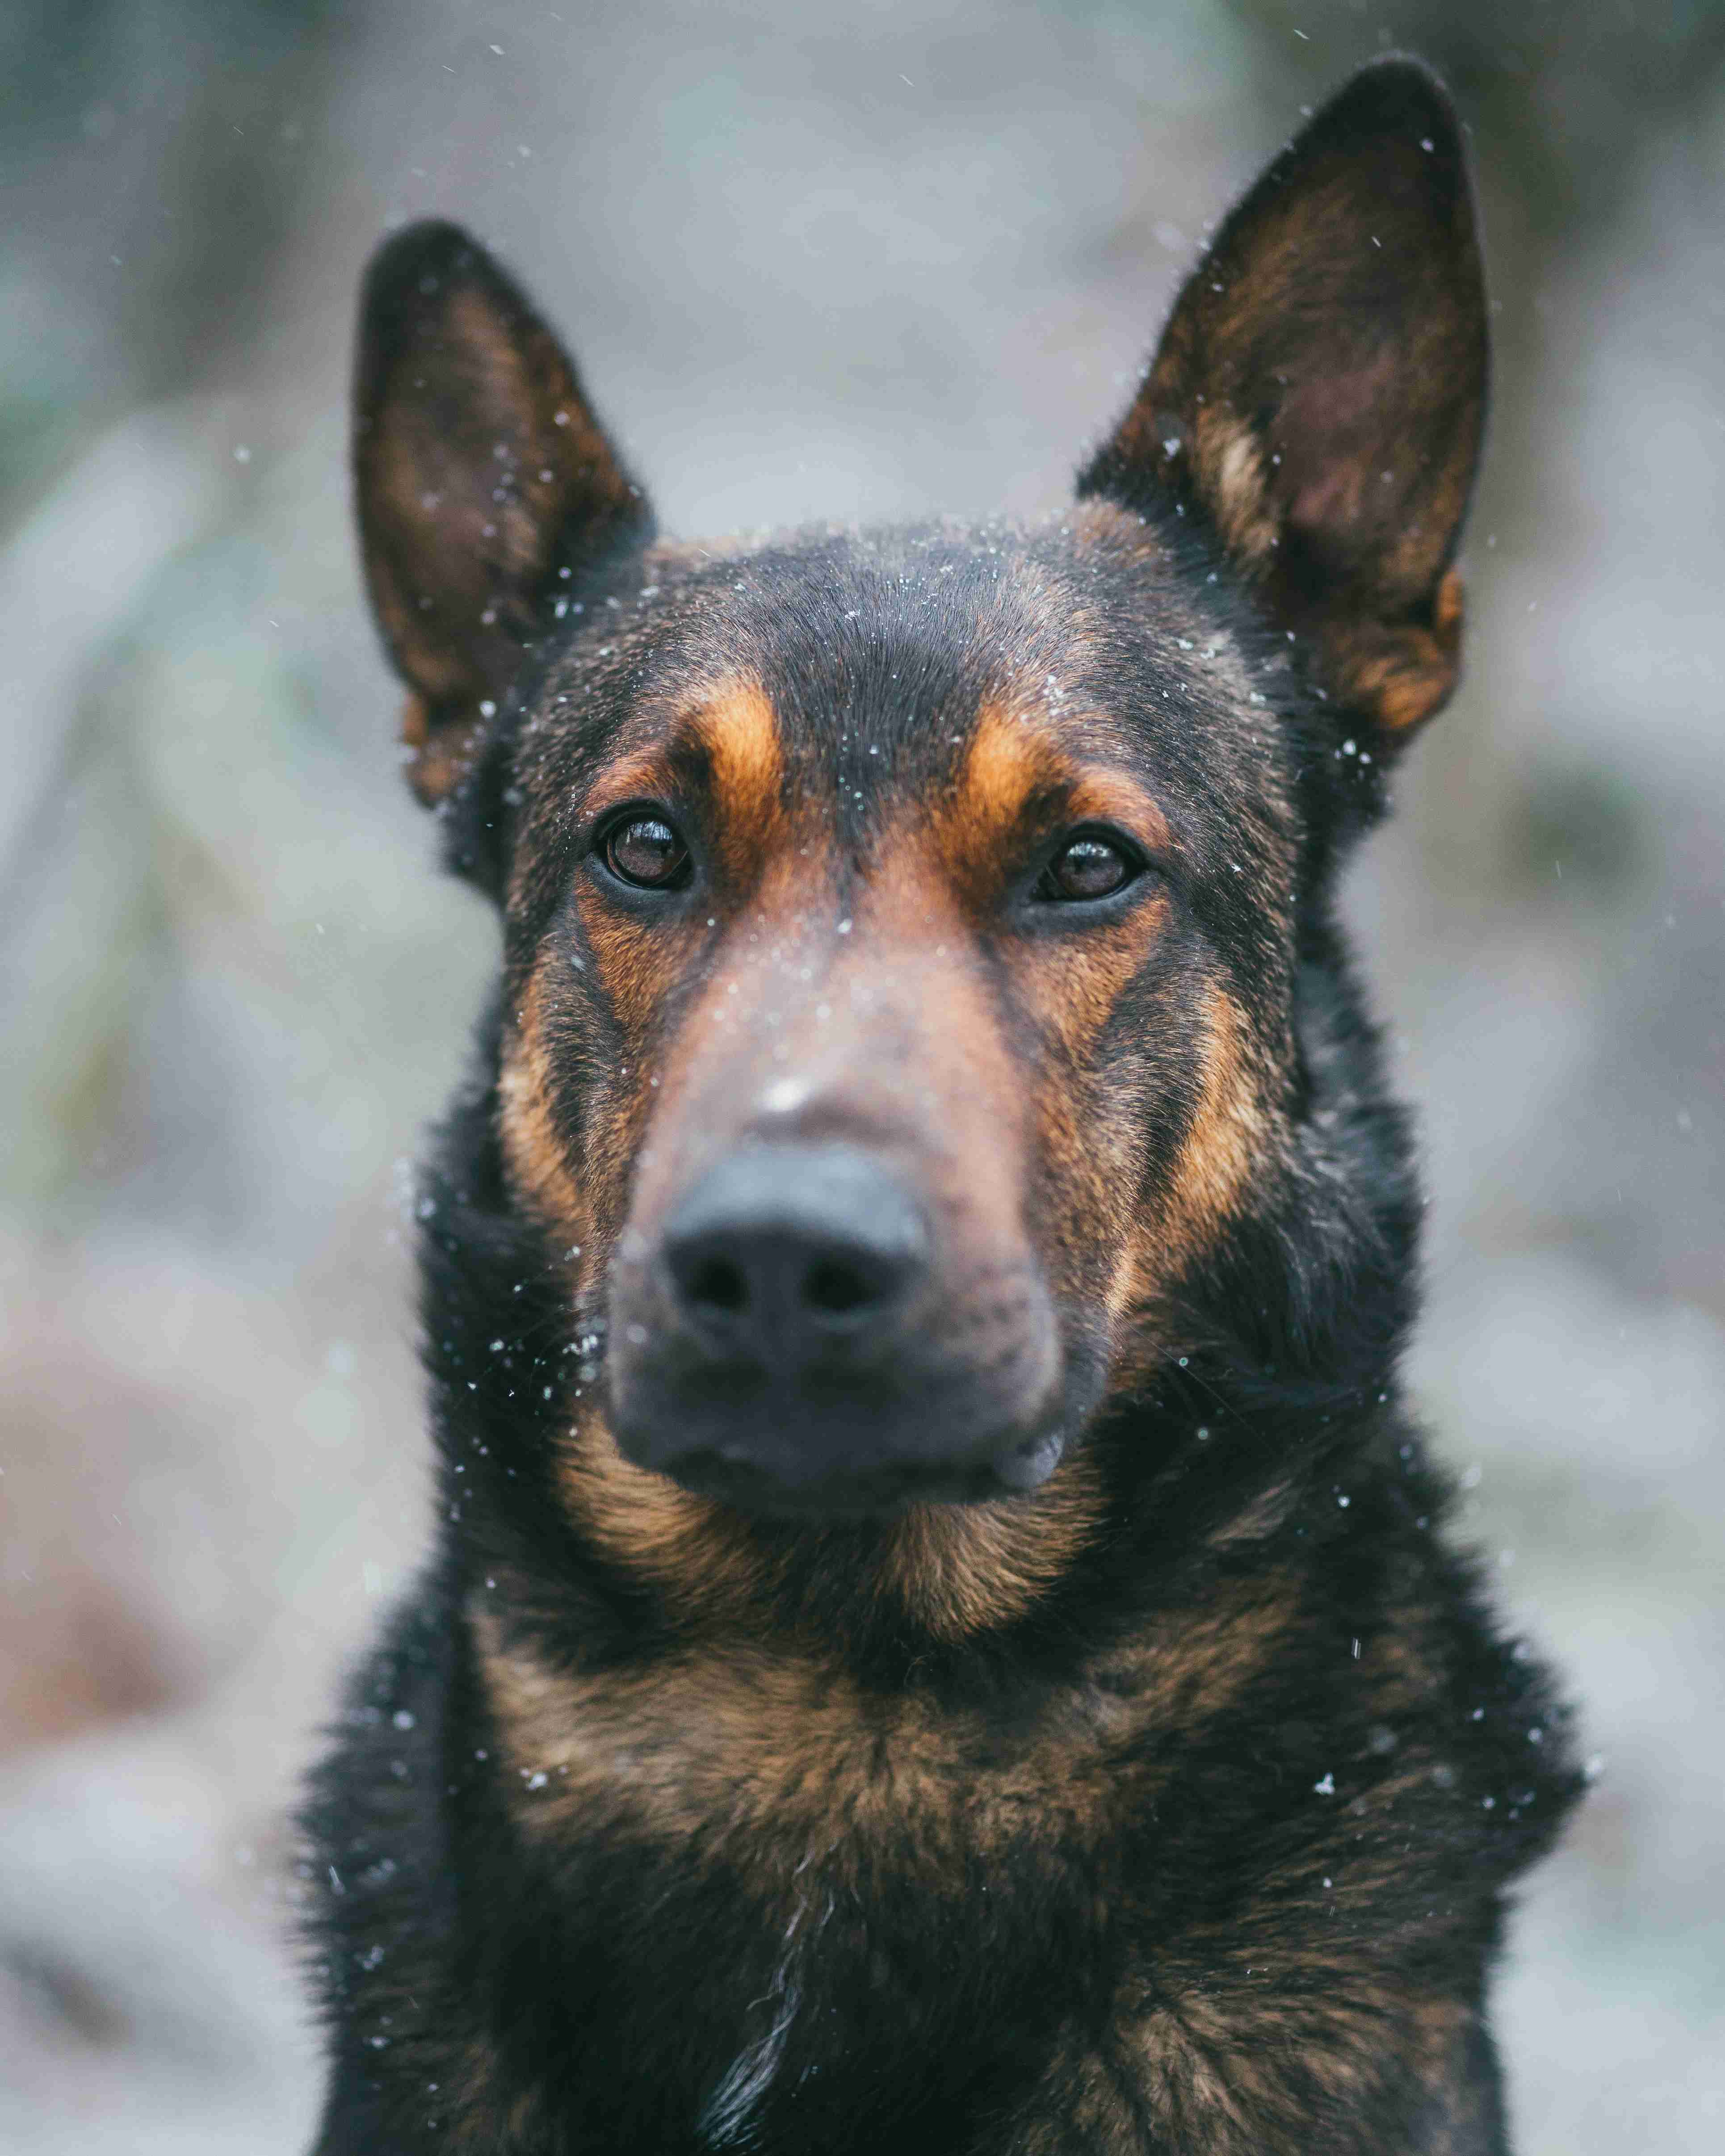 How do you handle a German Shepherd that becomes easily agitated or aggressive towards strangers in an apartment complex?